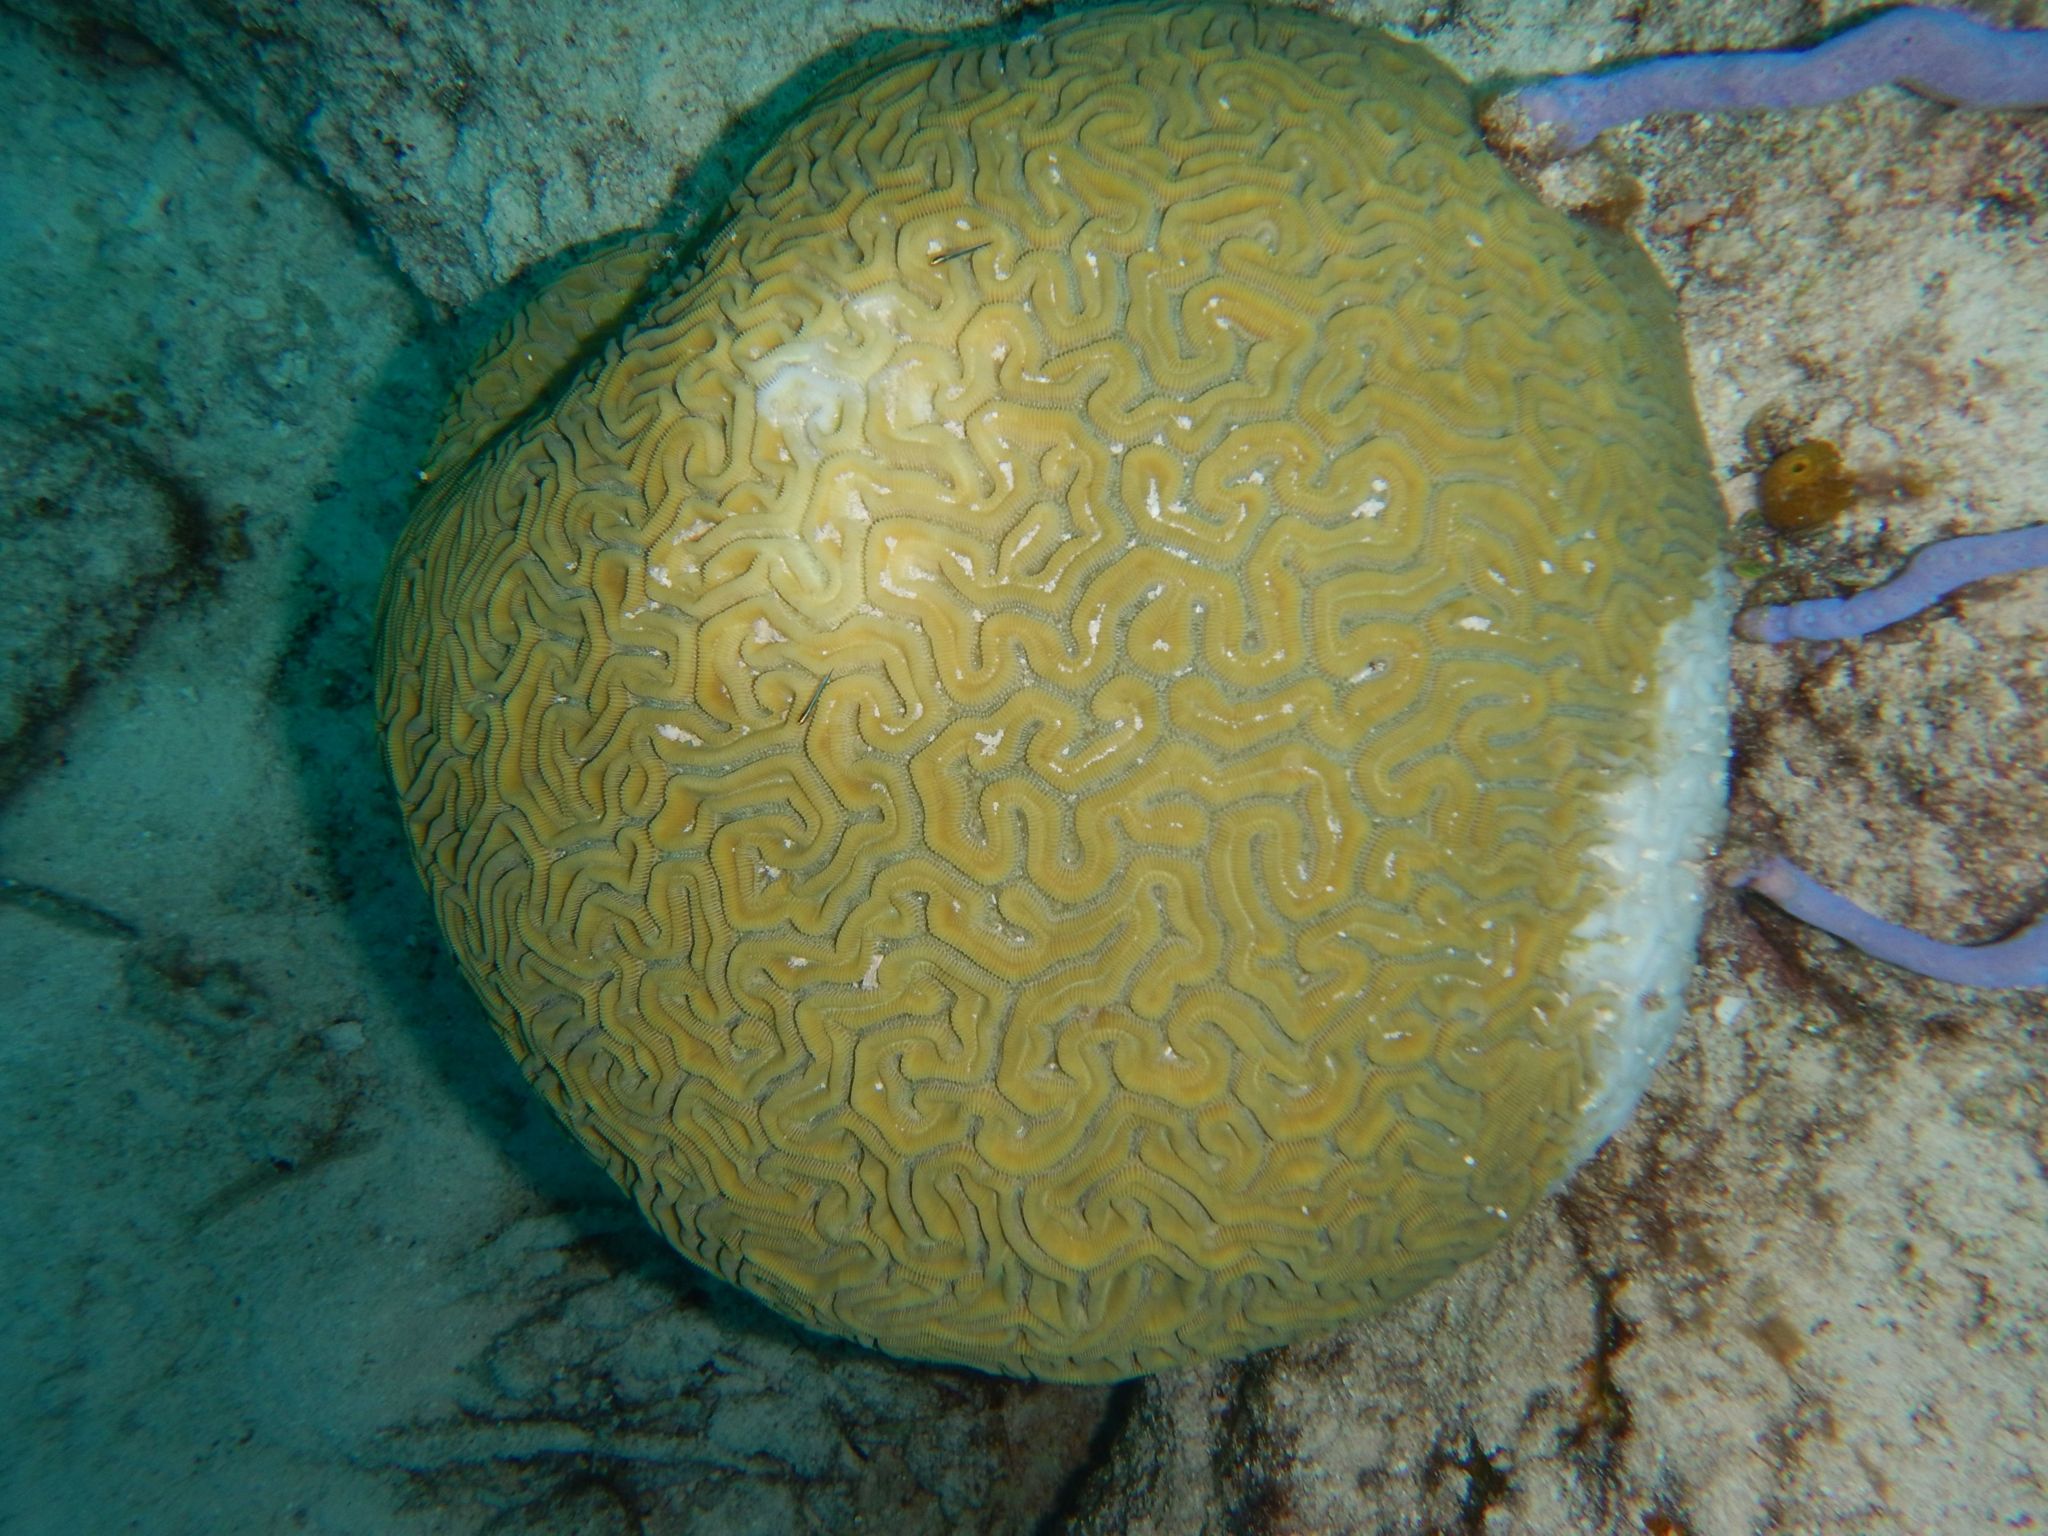 Newly infected brain coral West Caicos May 2019